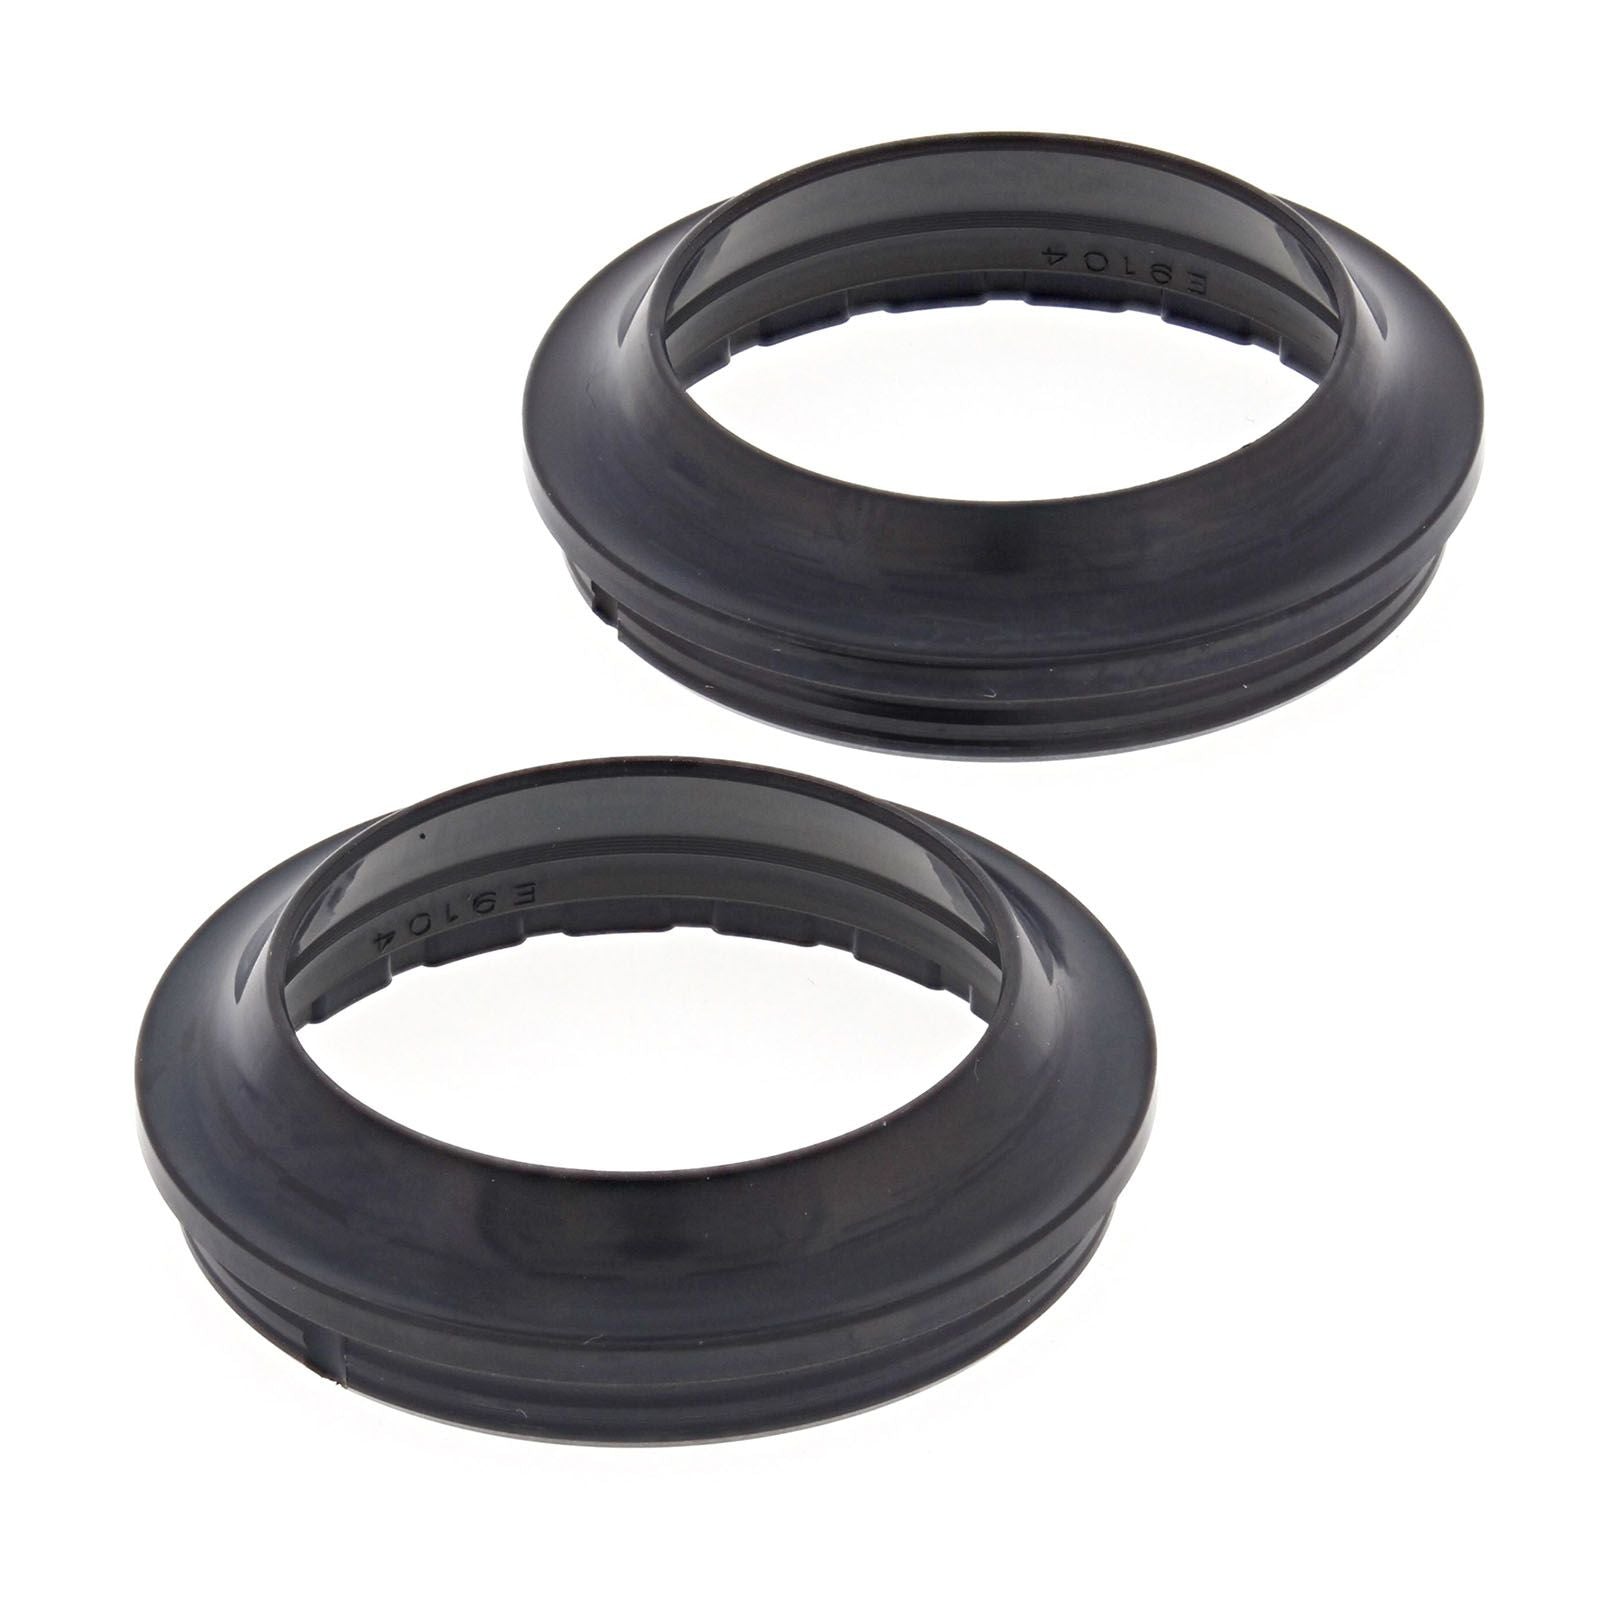 New ALL BALLS Racing Fork Dust Seals Pair #AB571081